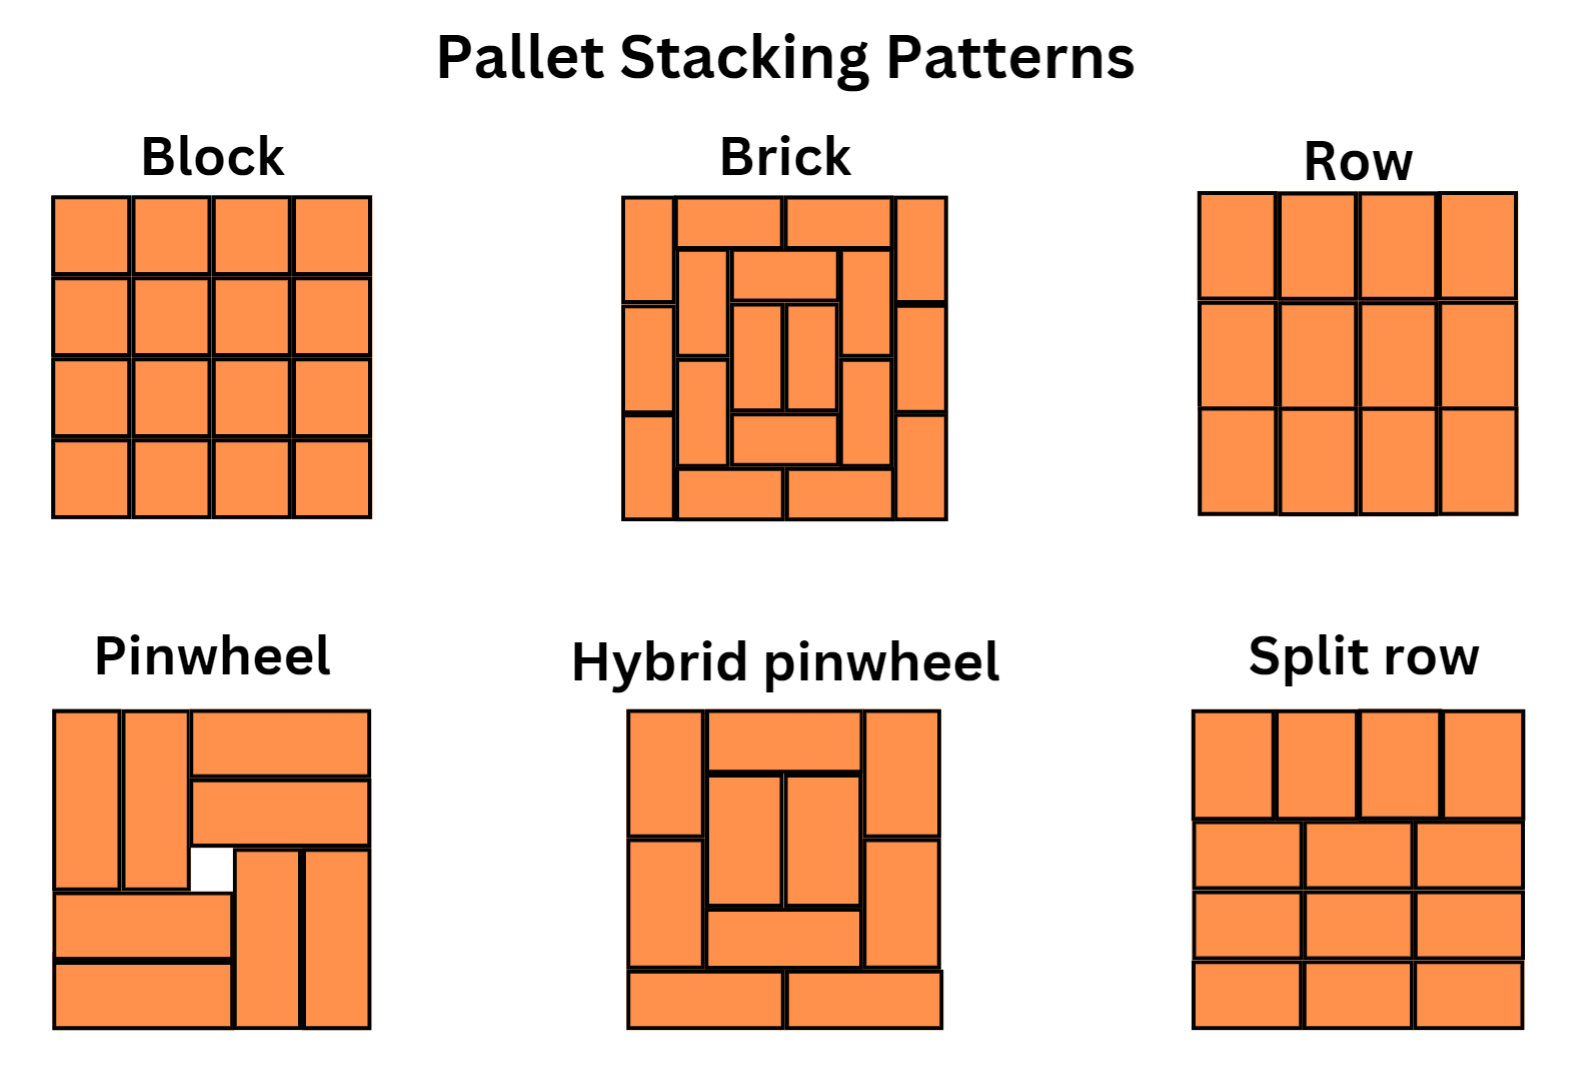 A diagram showing the different pallet stacking patterns